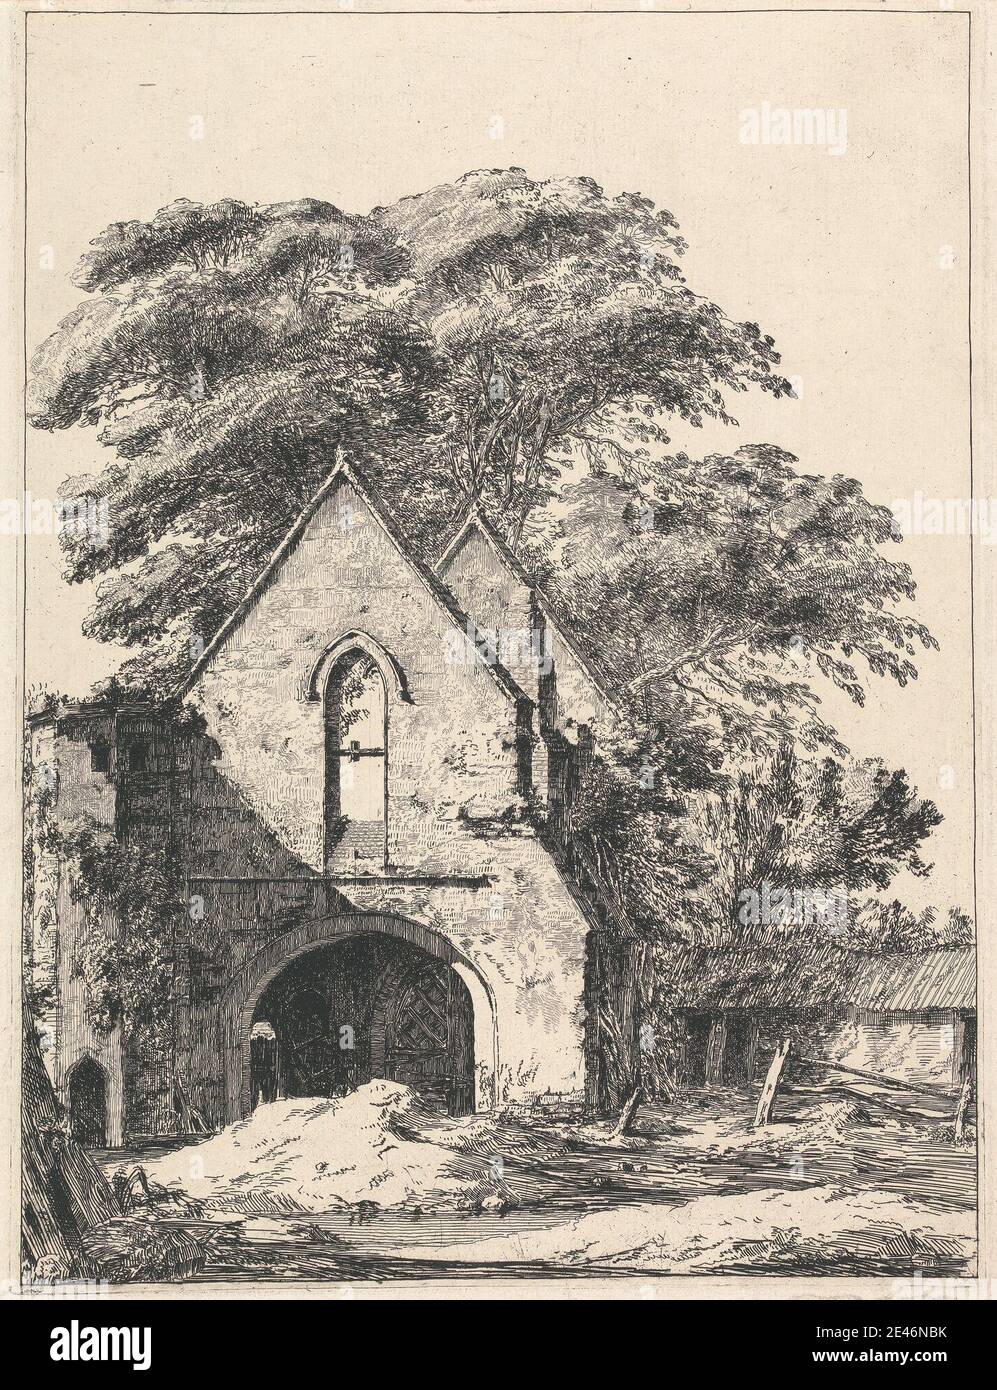 Heneage Finch fourth Earl of Aylesford, 1751–1812, British, Maxstoke Priory, undated. Etching on moderately thick, slightly textured, beige laid paper.   ancient , arches , architectural subject , buildings , bushes , church , fences , old , priory , ruins , rural , stones , towers , trees , vines , windows , wood. England , Maxstoke , Maxstoke Priory , North Warwickshire , United Kingdom , Warwickshire Stock Photo